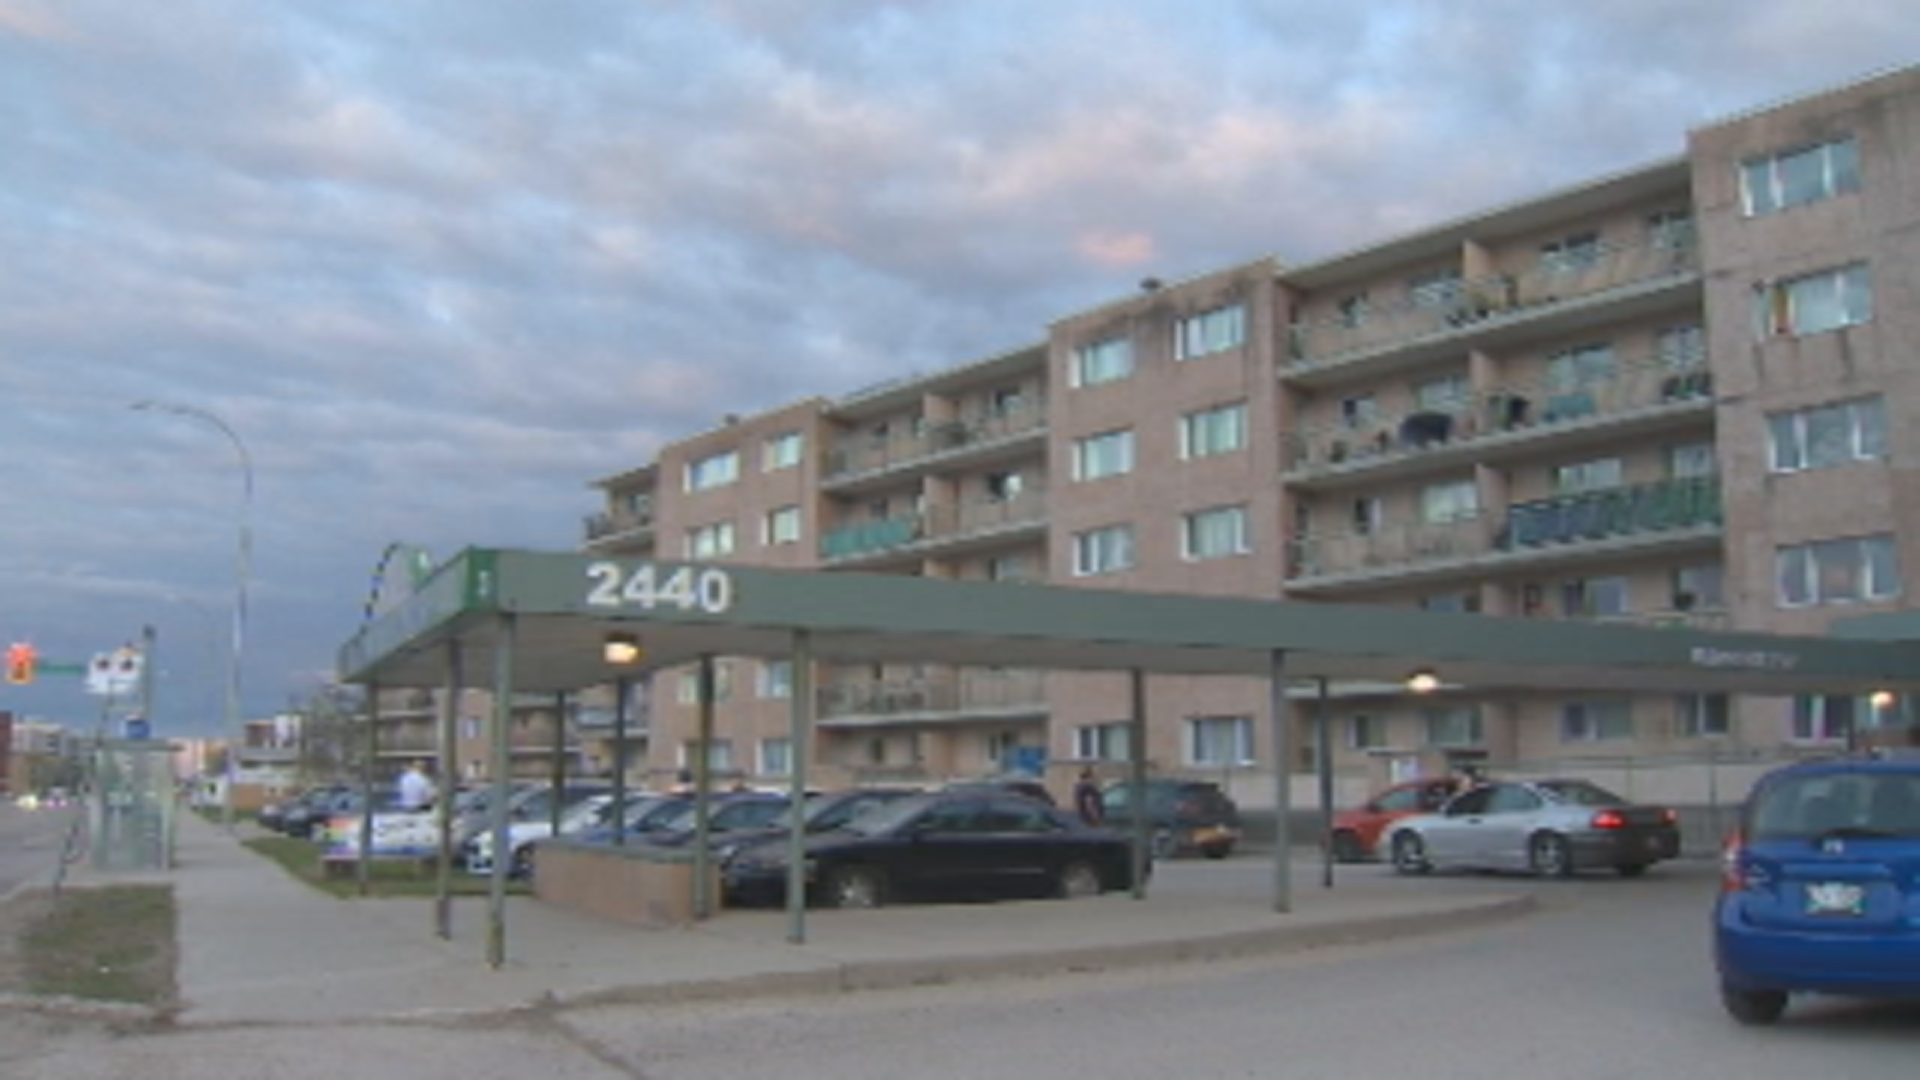 Birchwood Terrace residents to remain displaced all summer during repairs - Winnipeg